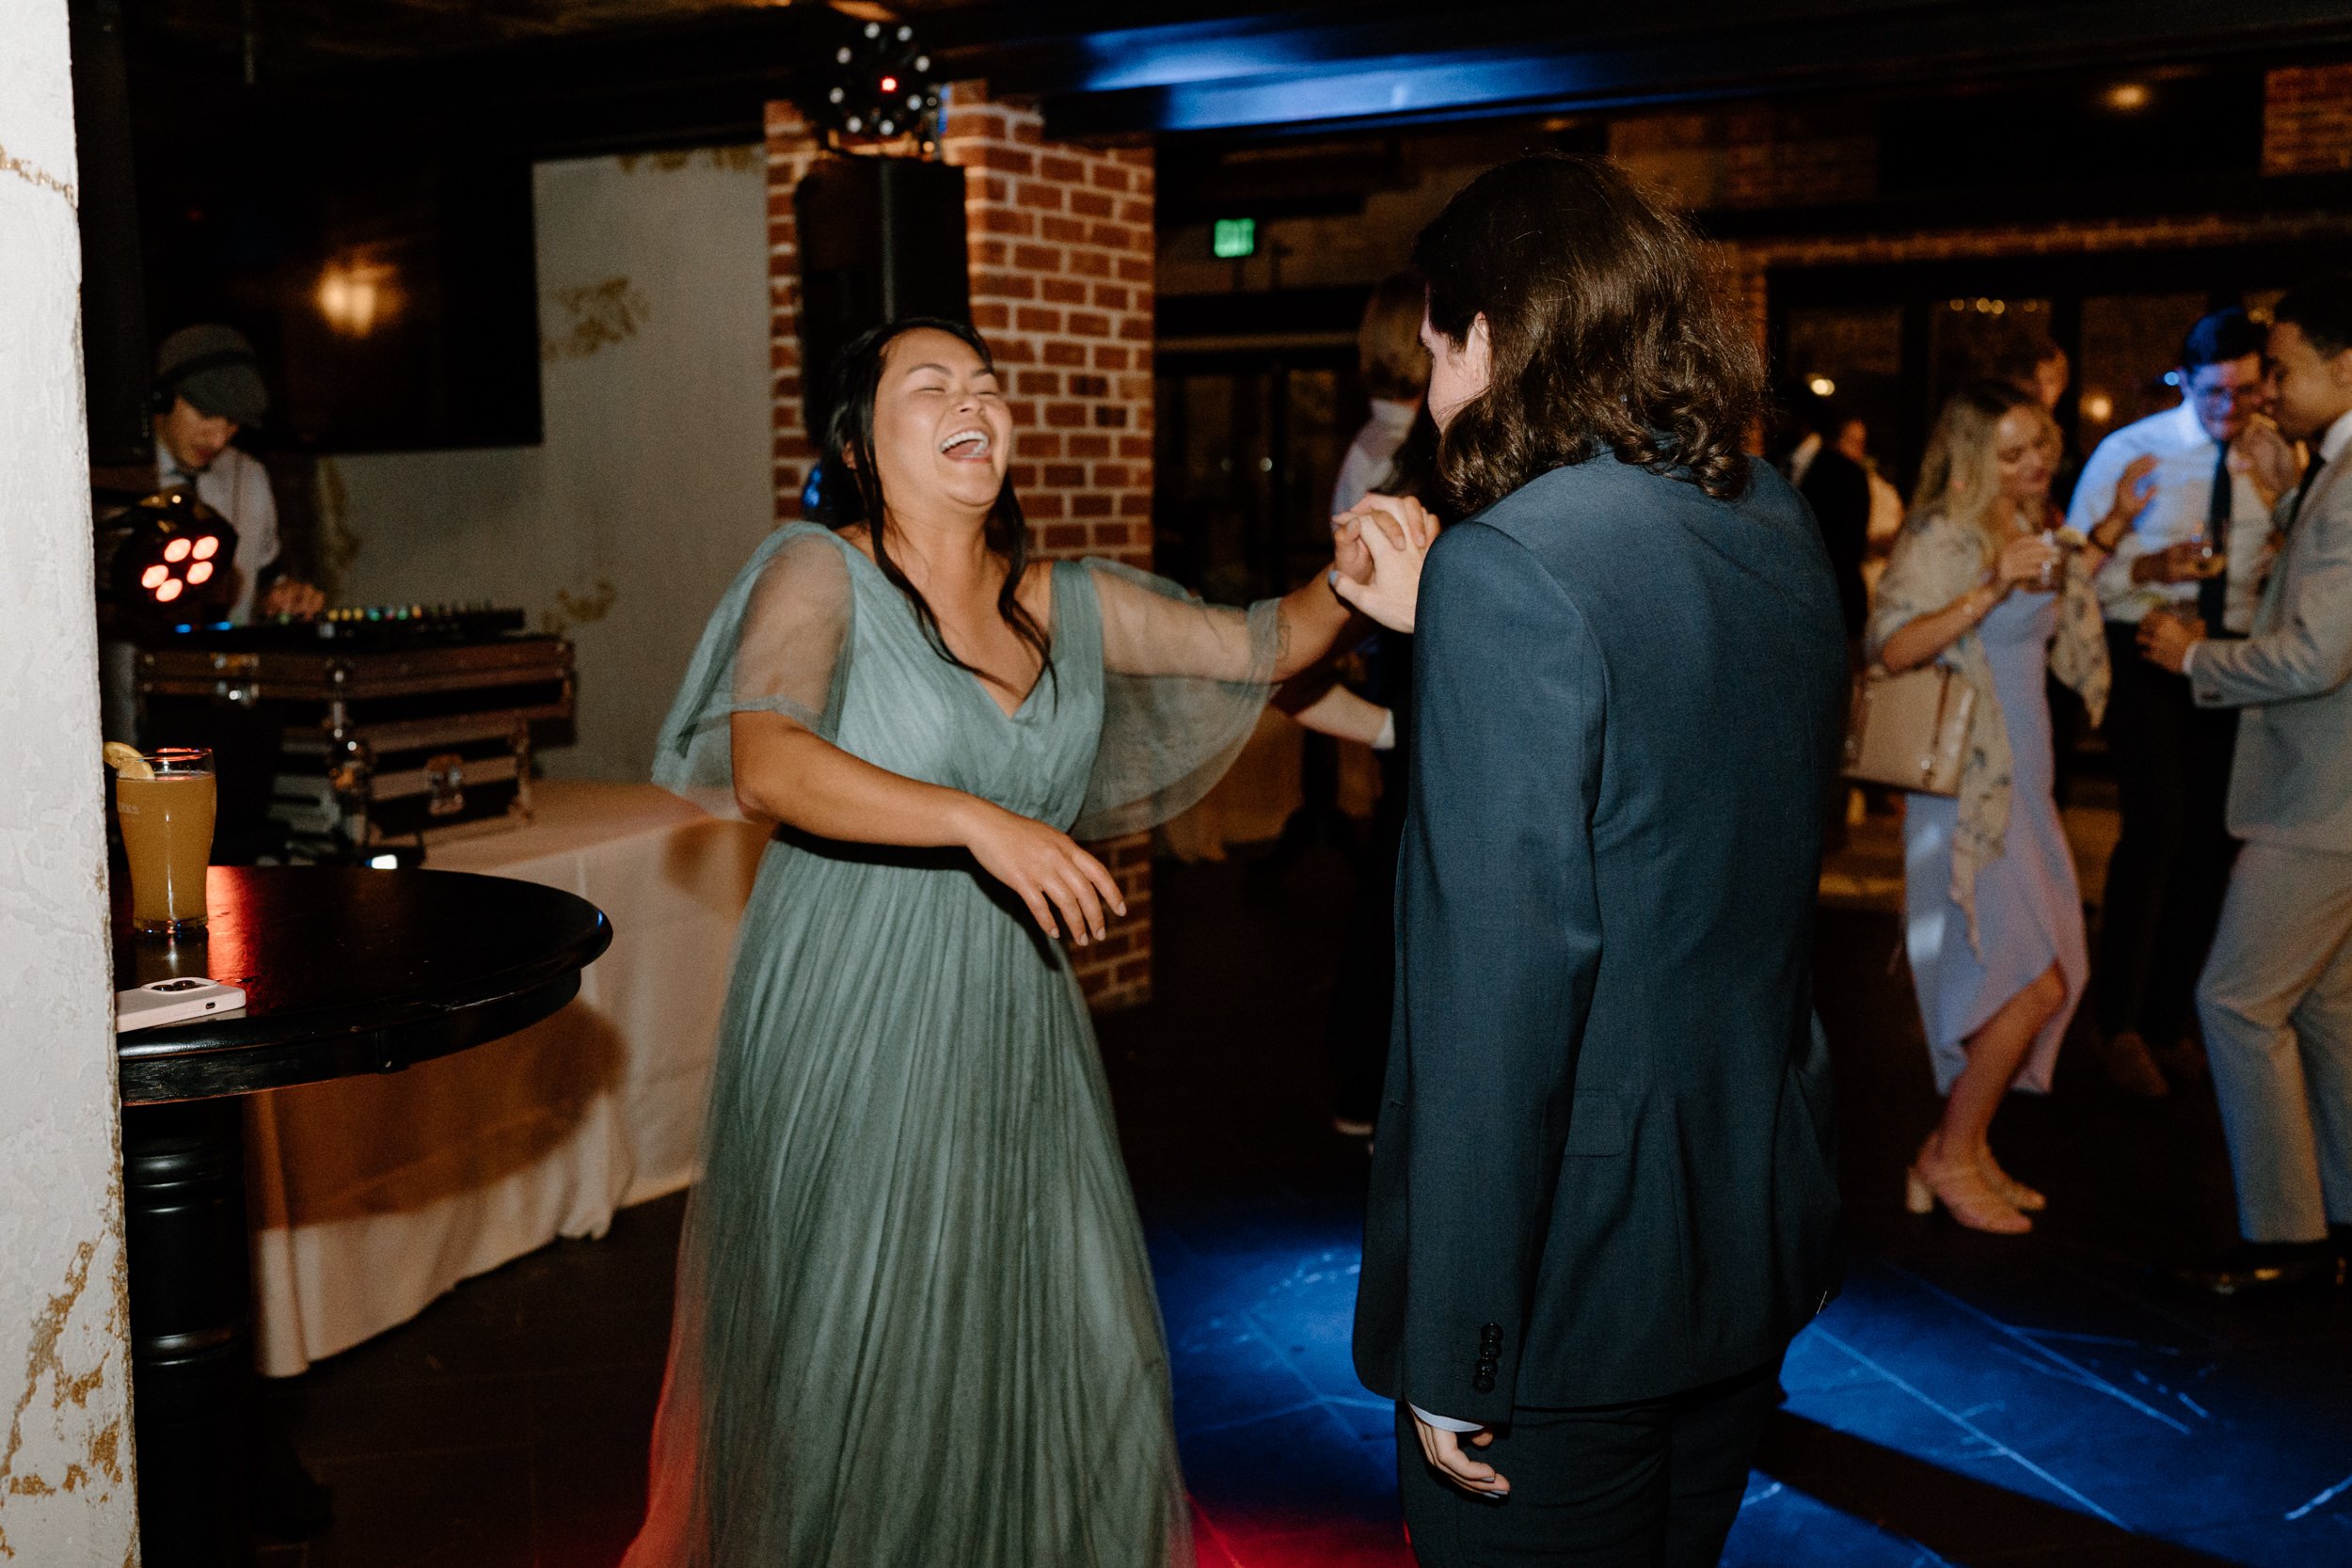 Wedding guests dance during the reception